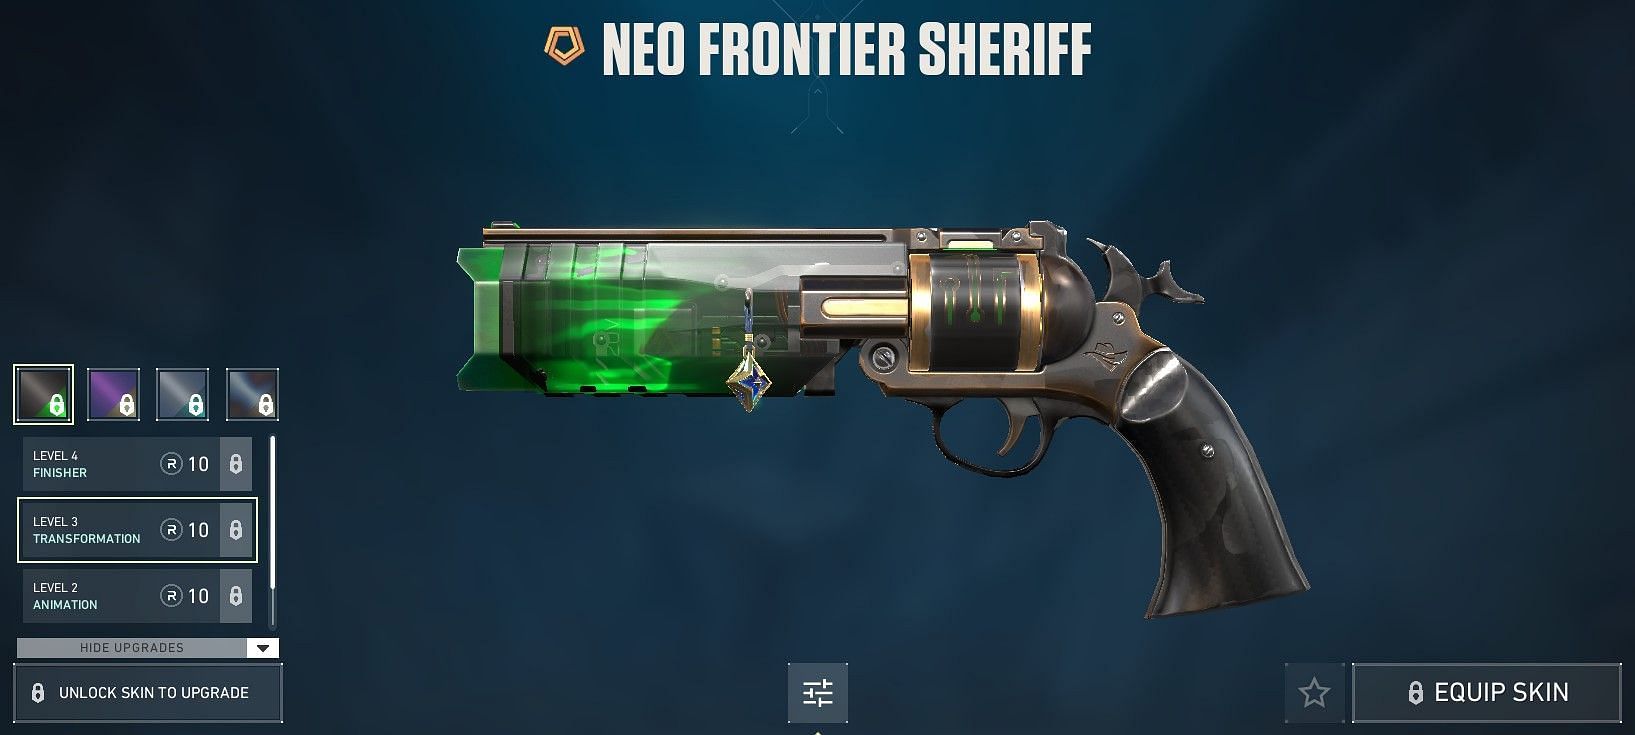 Neo Frontier Sheriff (Image via Riot Games)